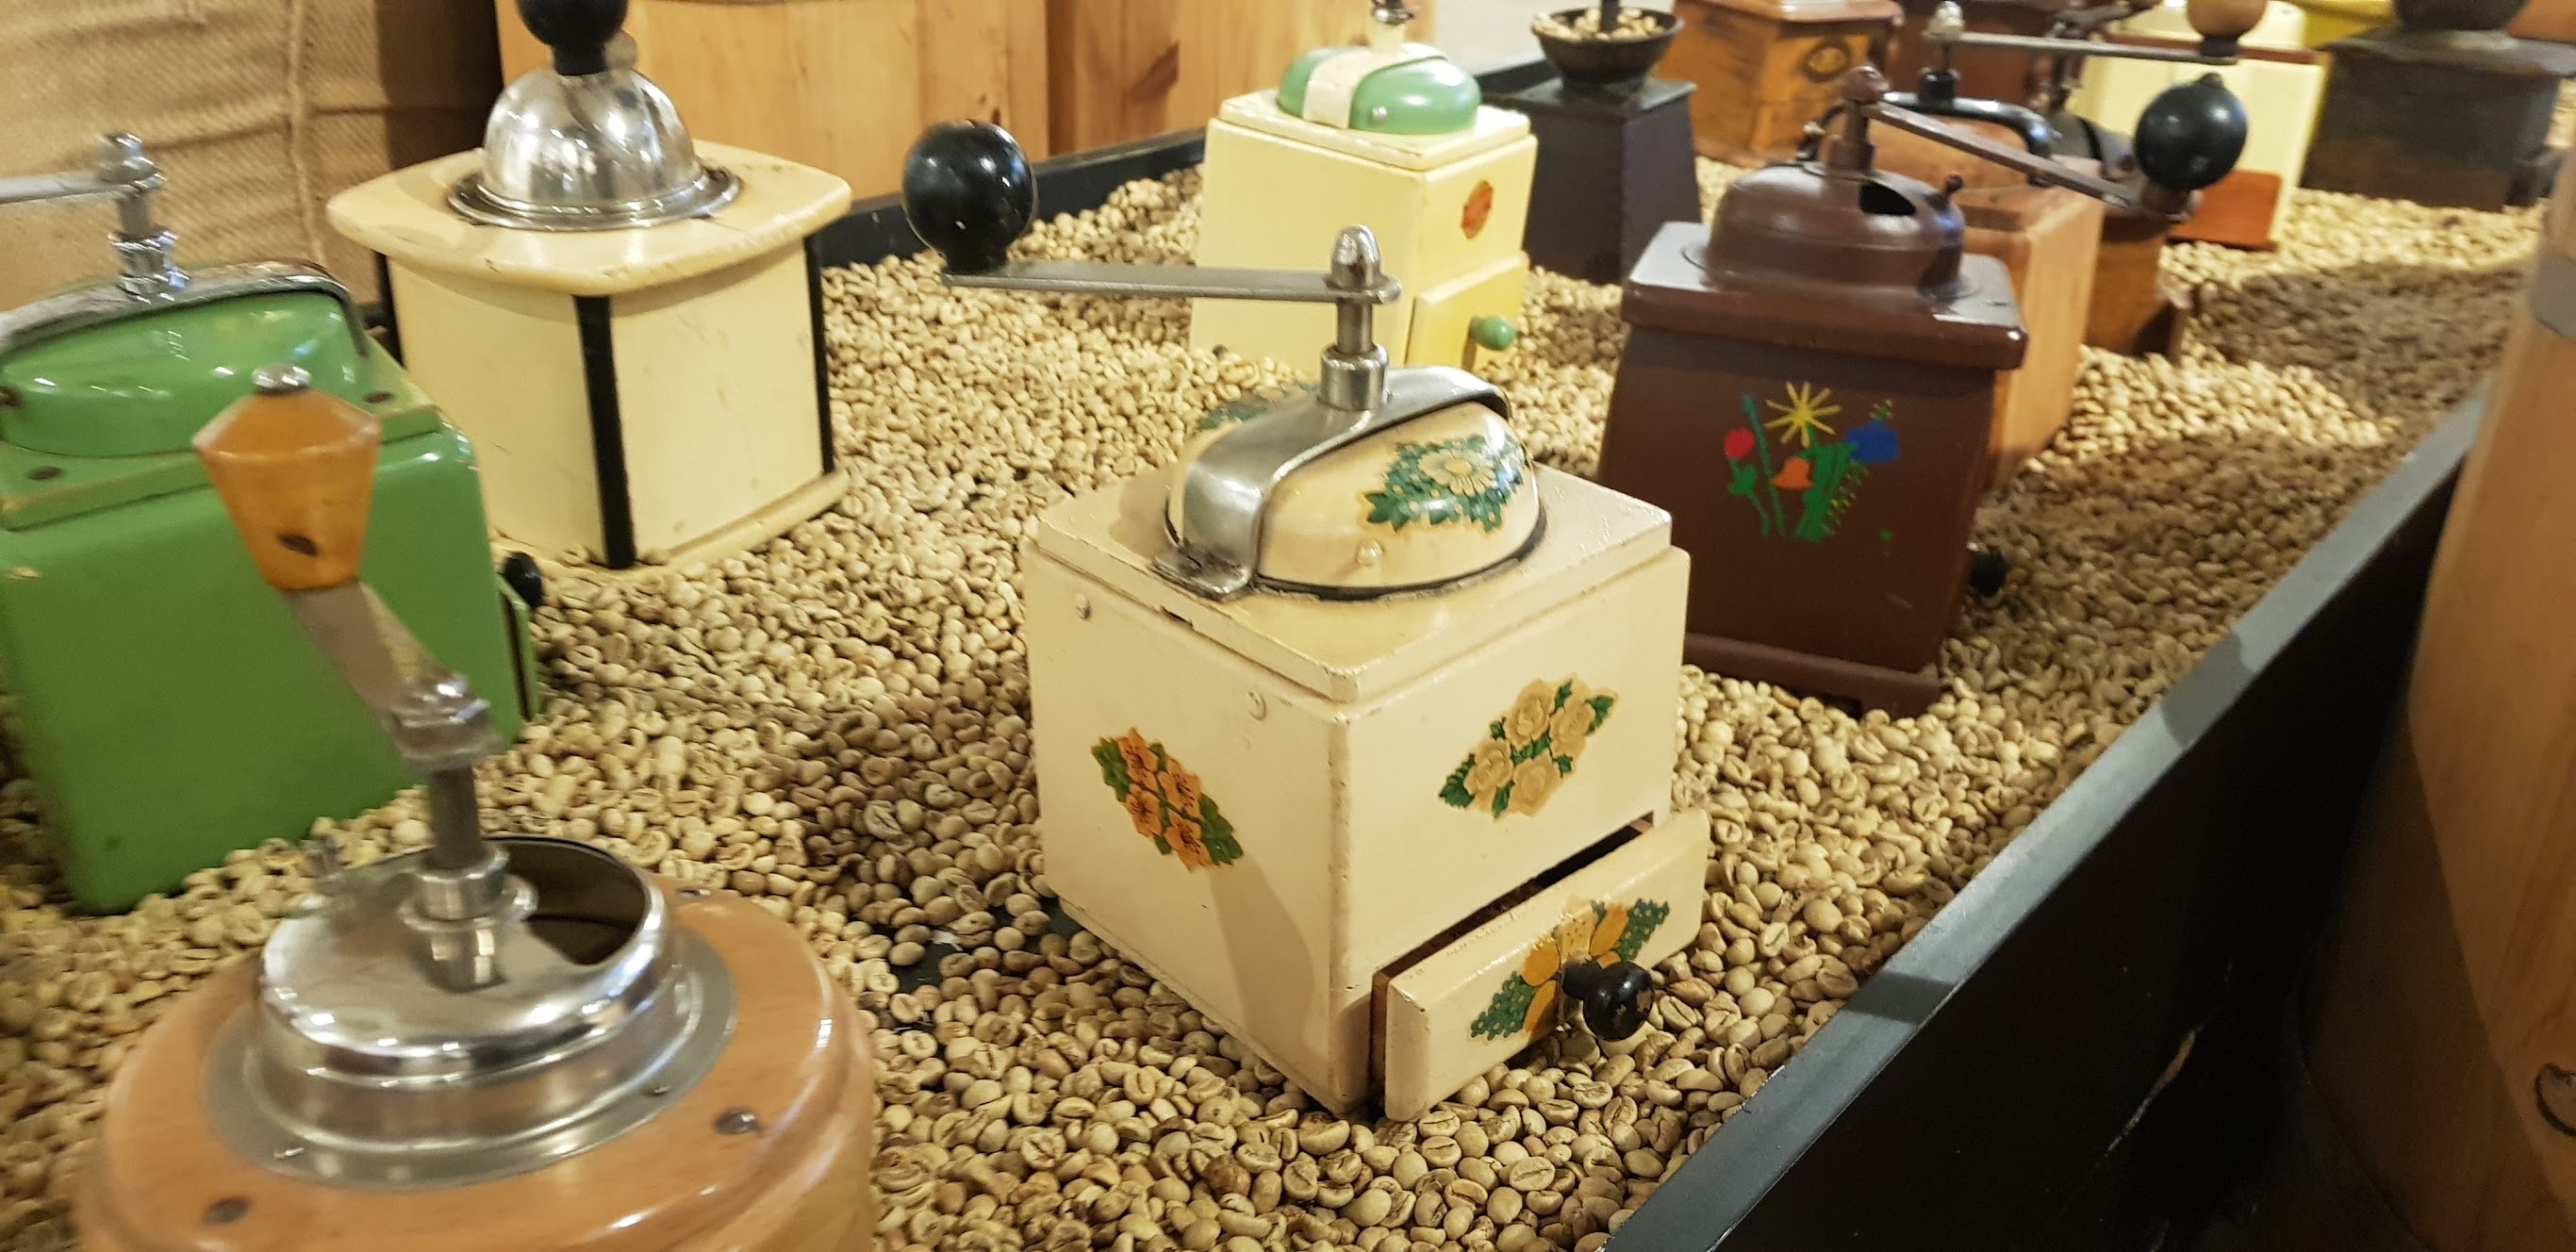 Coffee grinder - The world Coffee museum of Buon Ma Thuot, Vietnam